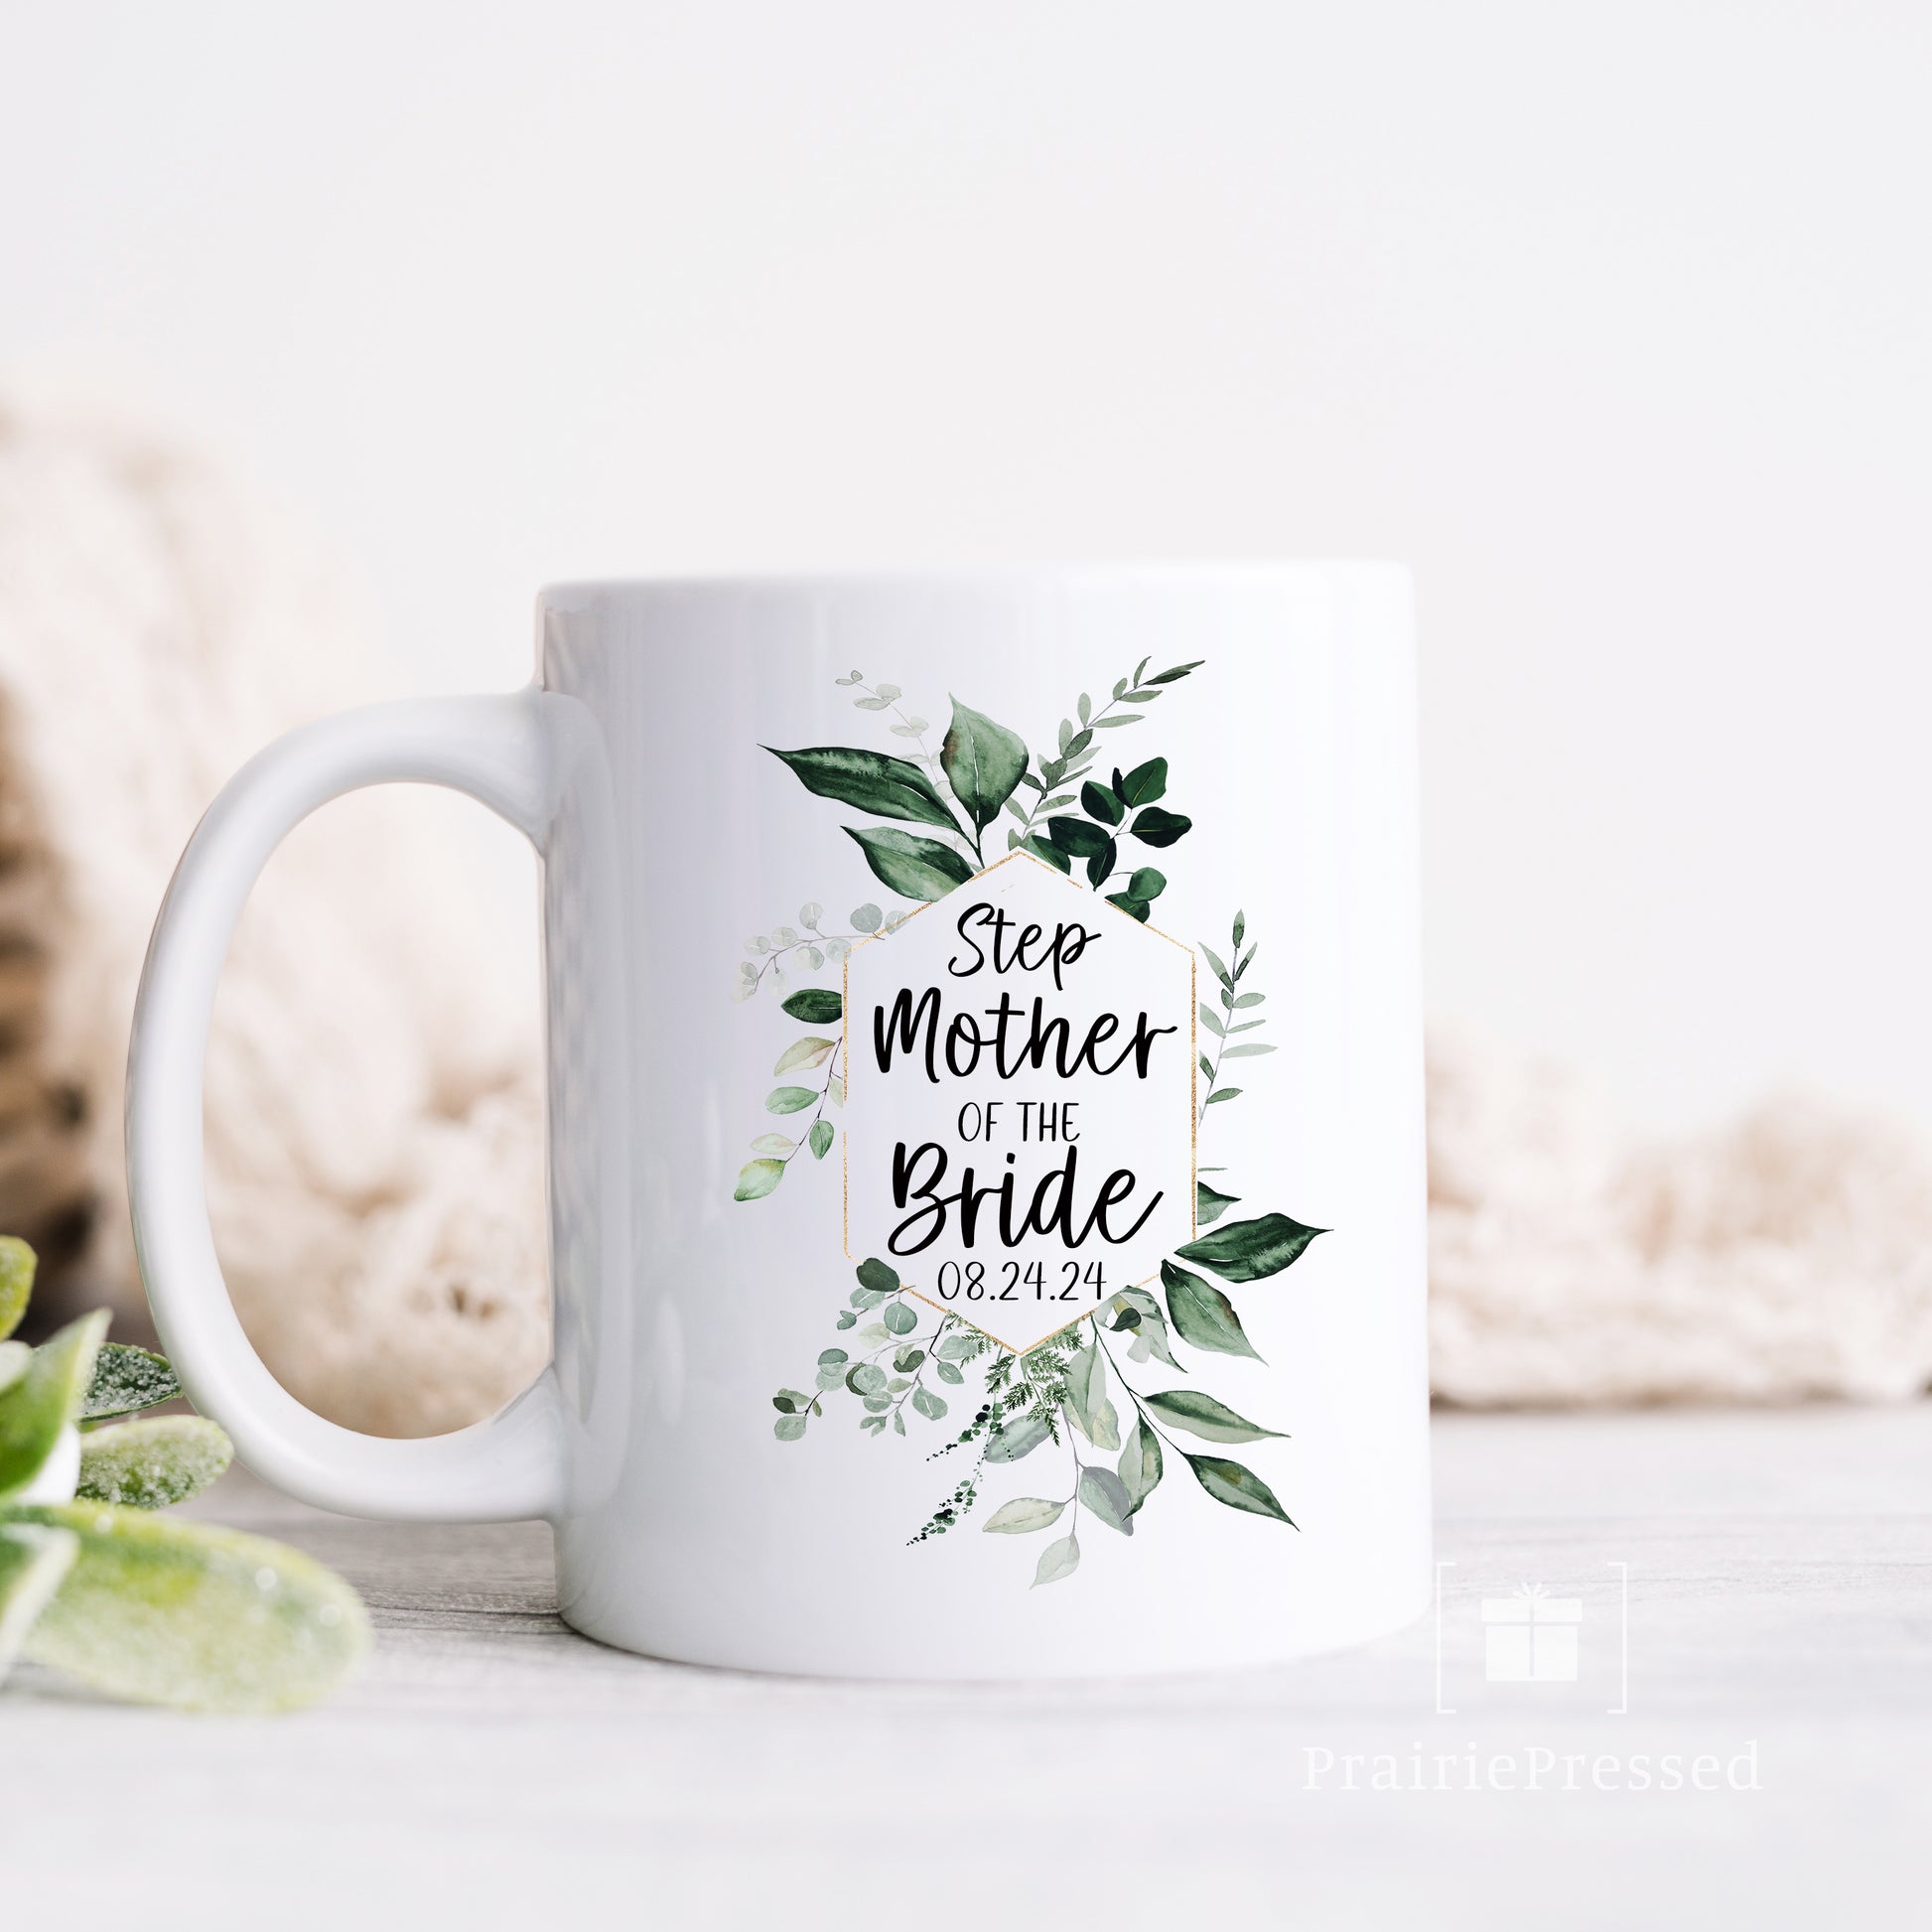 Step Mother of the Bride Ceramic COffee Mug. Add weddng date to personalize.